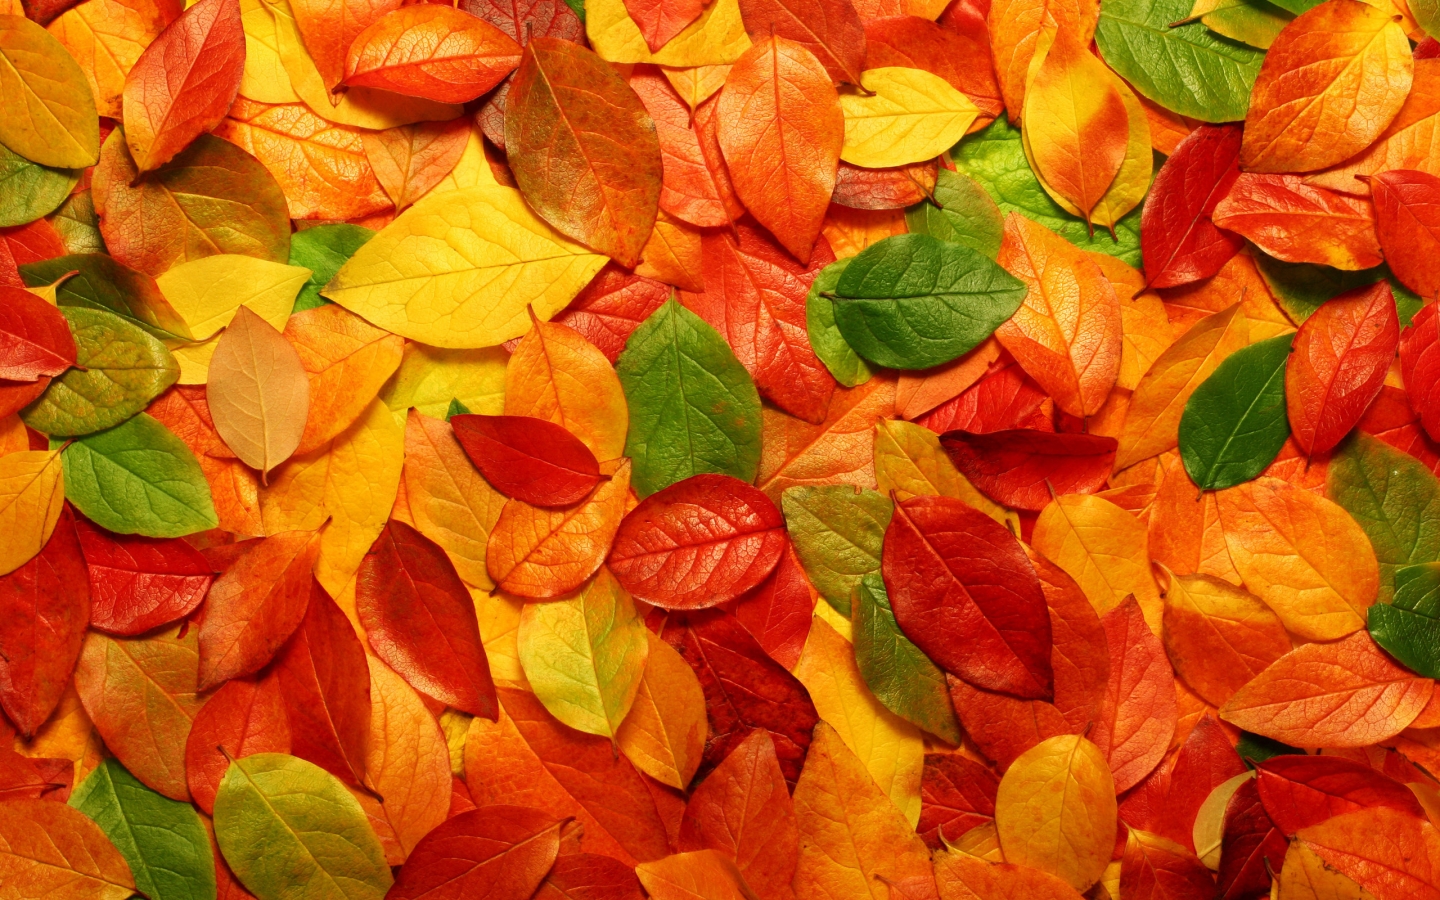 Autumn carpet of leaves for 1440 x 900 widescreen resolution